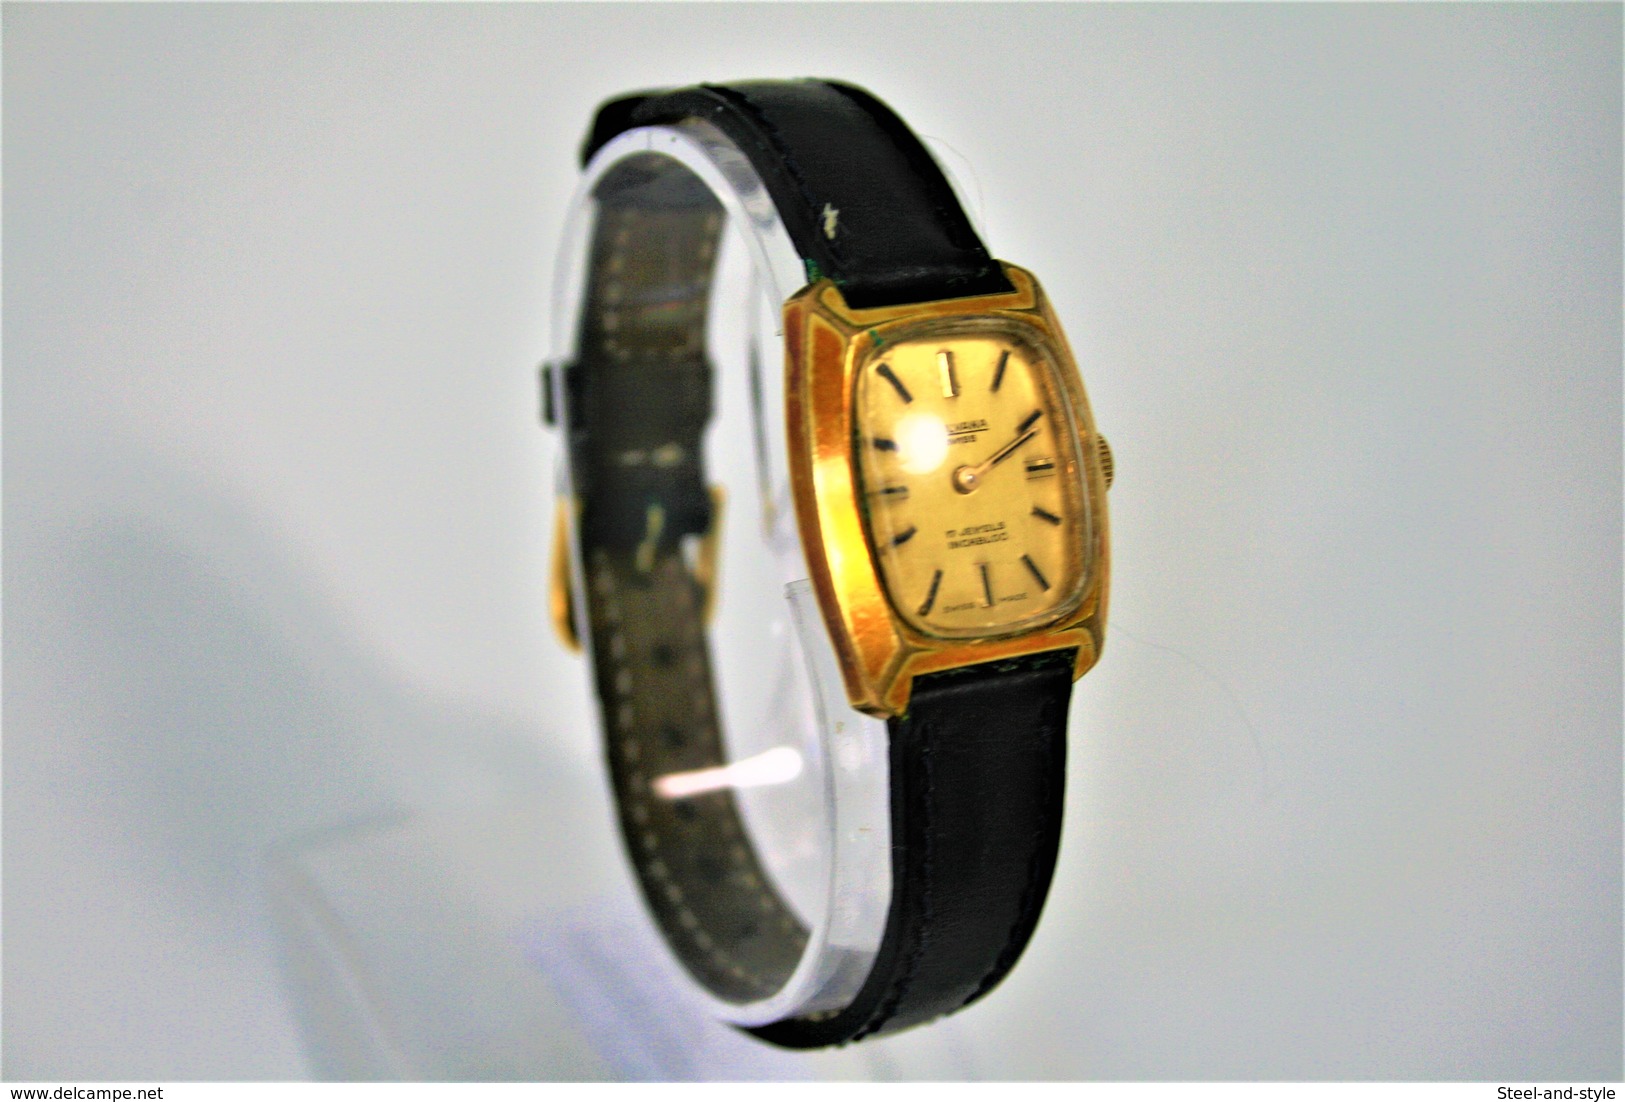 watches : SILVANA GOLD PLATED LADIES HAND WIND LIC BAND - original - 1960's - running - excelent condition